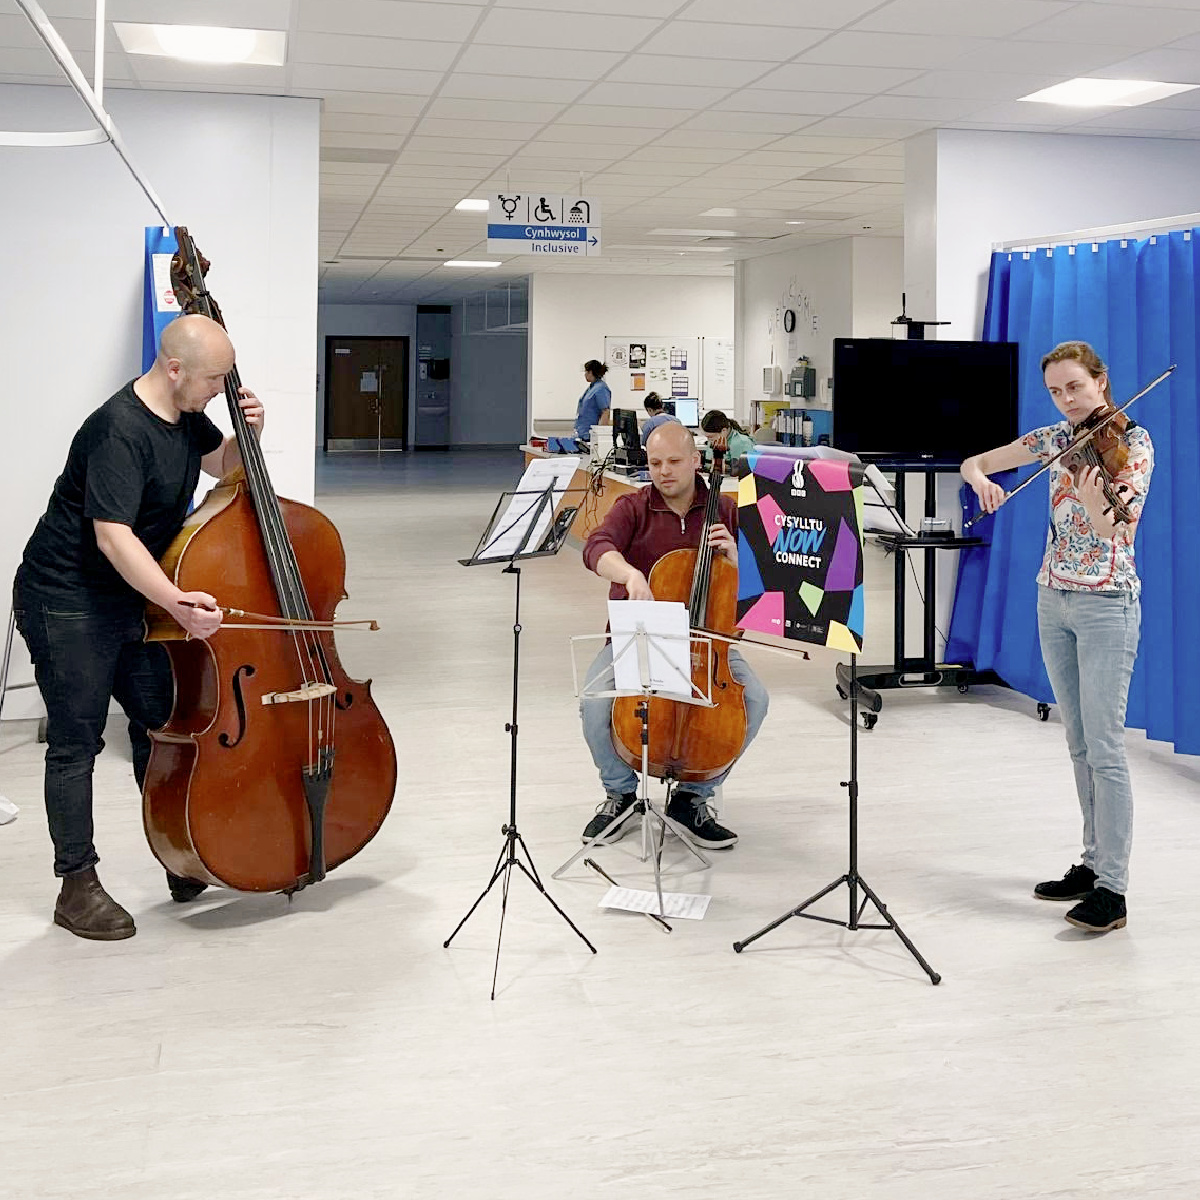 BBC NOW musicians brought the magic of music to the wards at St Woolos, The Royal Gwent and University Hospital of Wales today! ✨

Thank you to all the teams, the lovely patients and our healthcare partners for a wonderful day 🎶